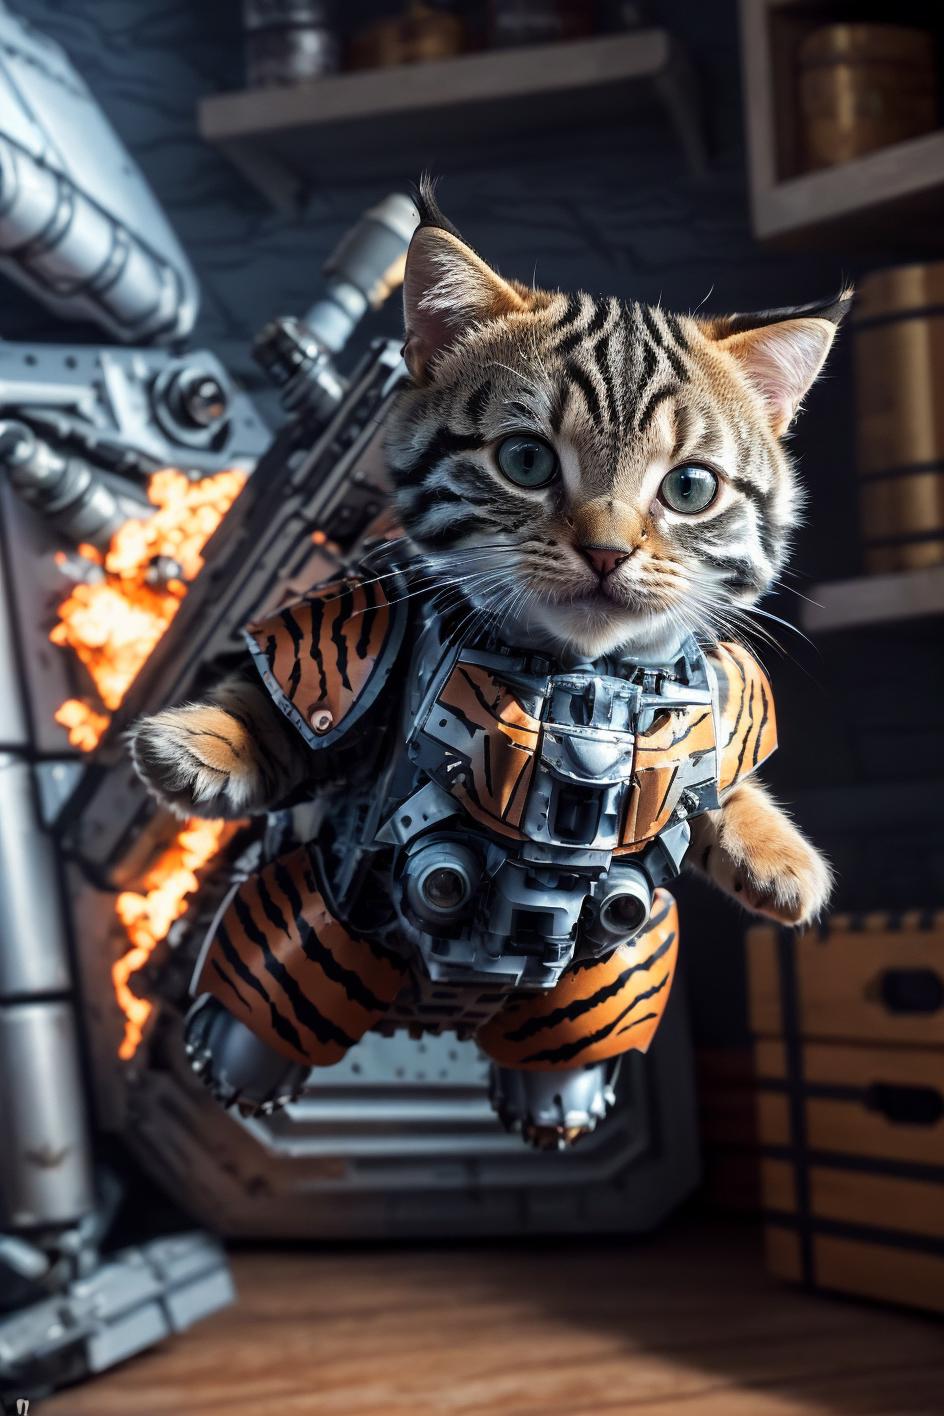 A small kitten wearing a toy robot costume and flying through the air.